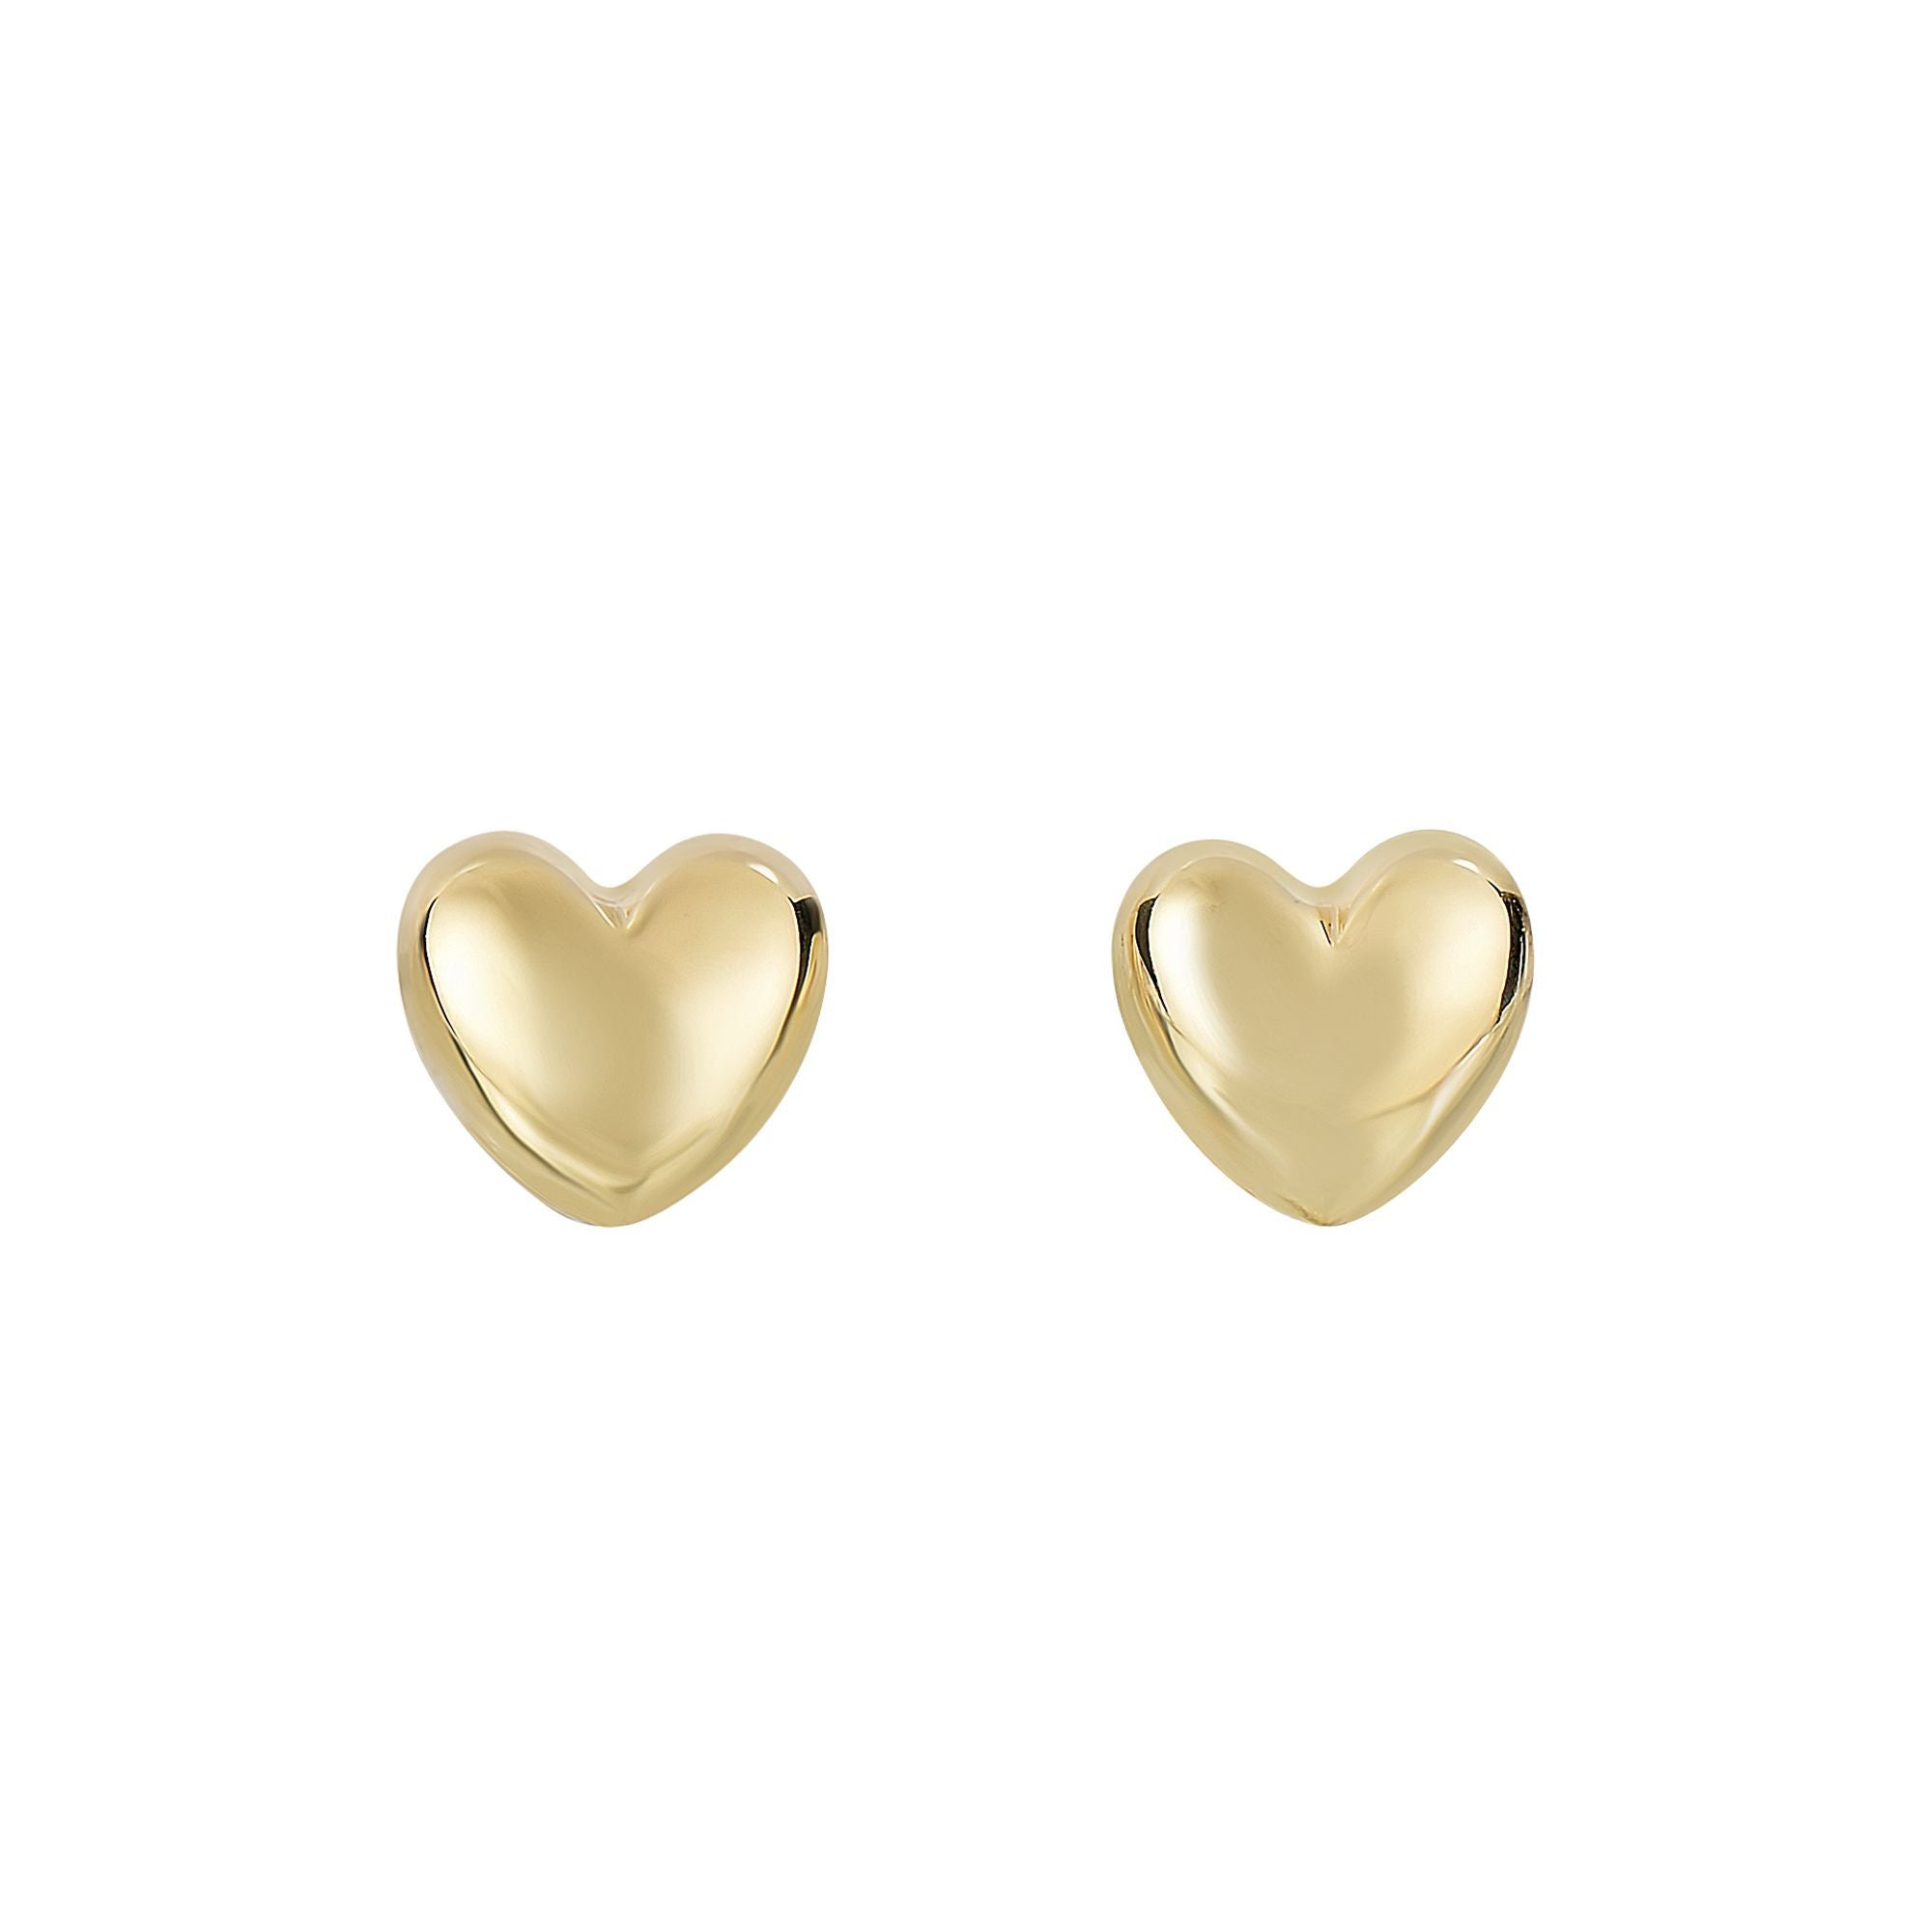 Minimalist Solid Gold Shiny Heart Fancy Post Earrings with Push Back Clasp - wingroupjewelry